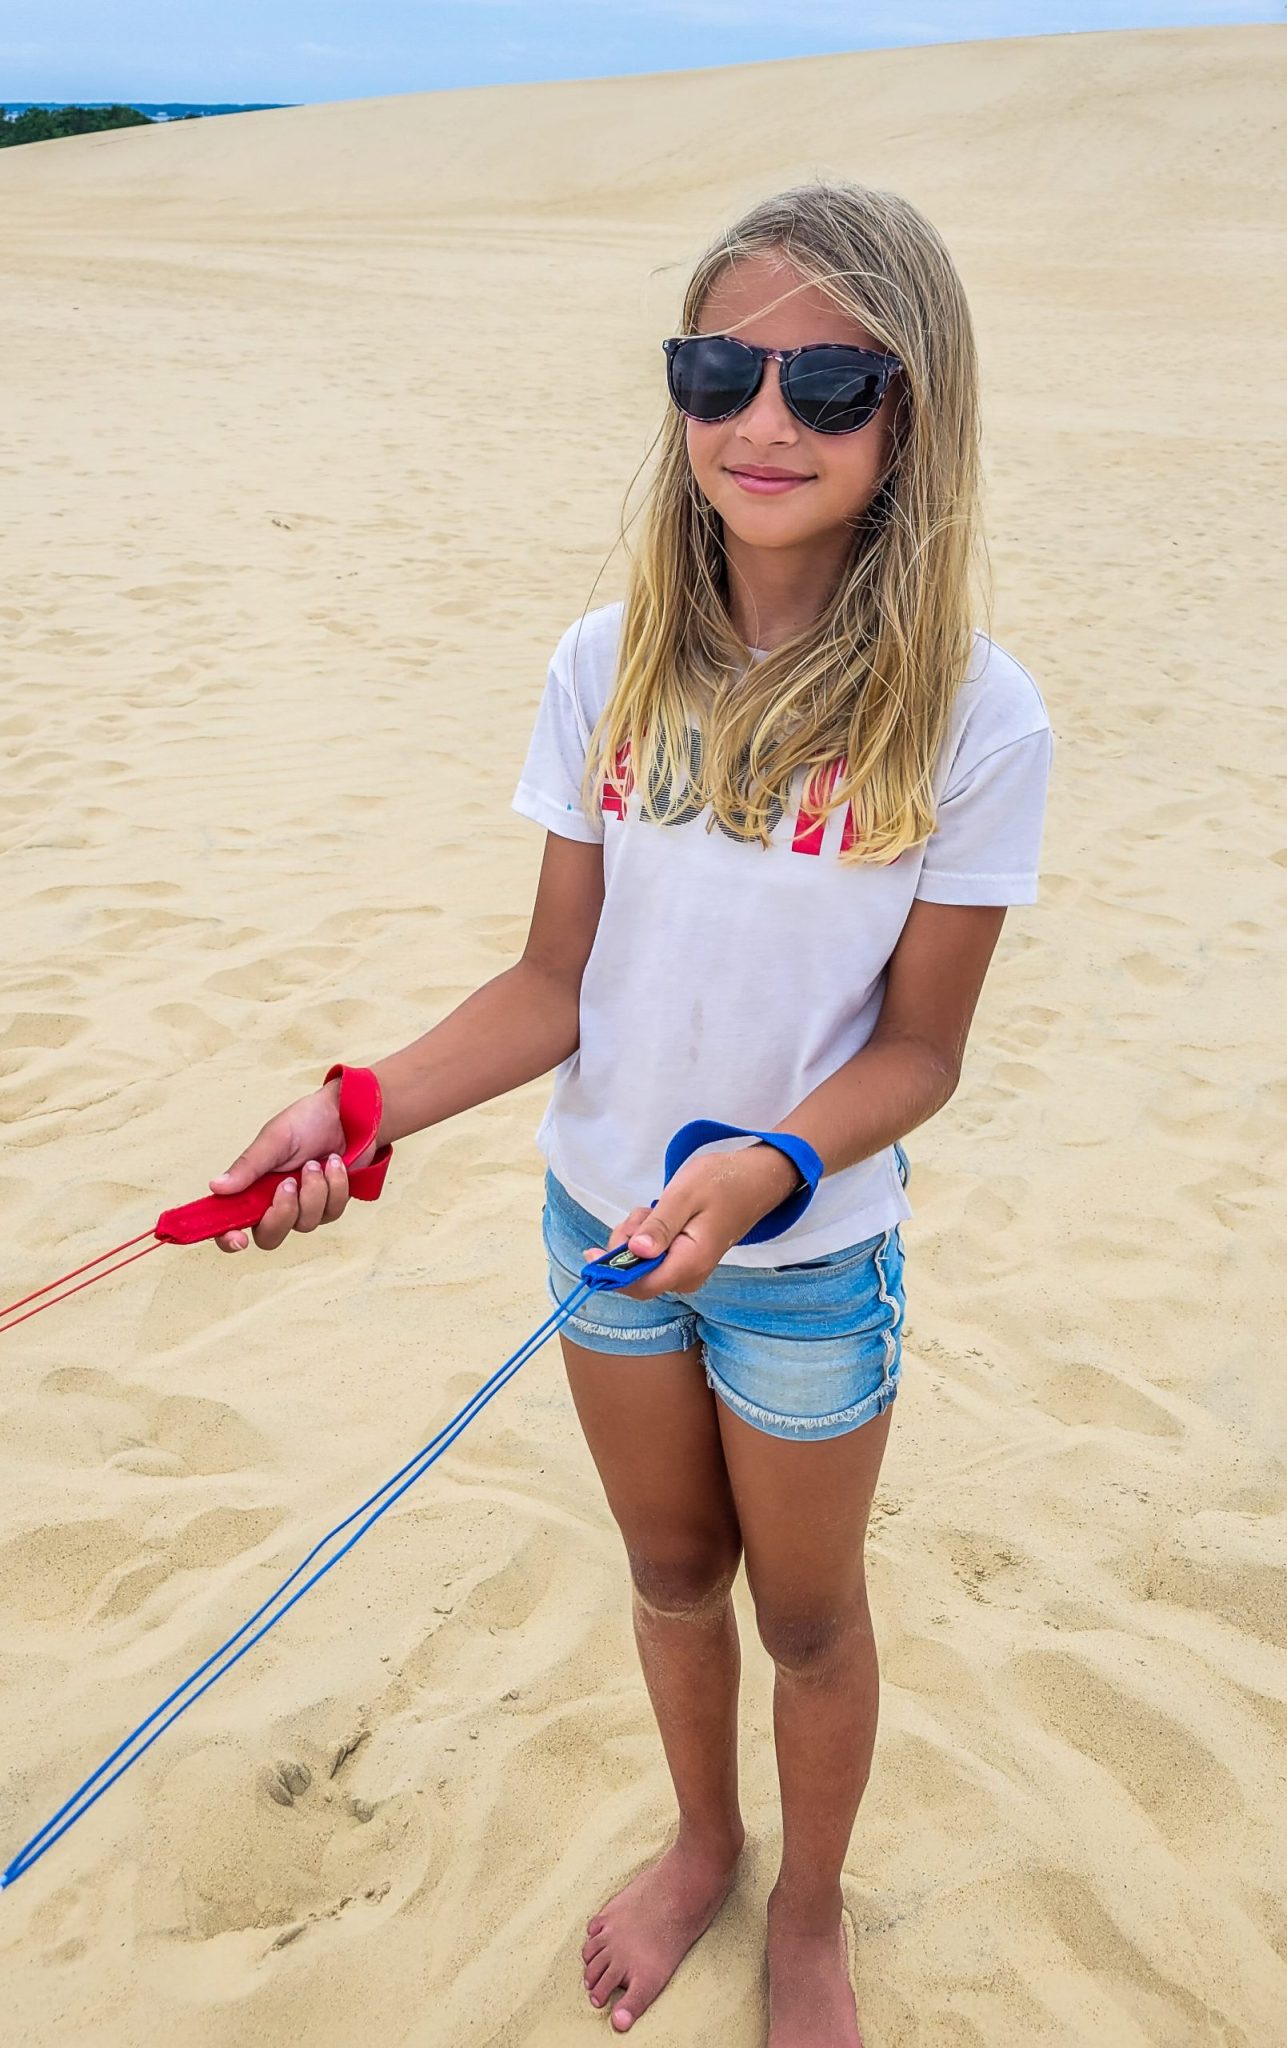 Girl flying a kite in the sand dunes at Outer Banks